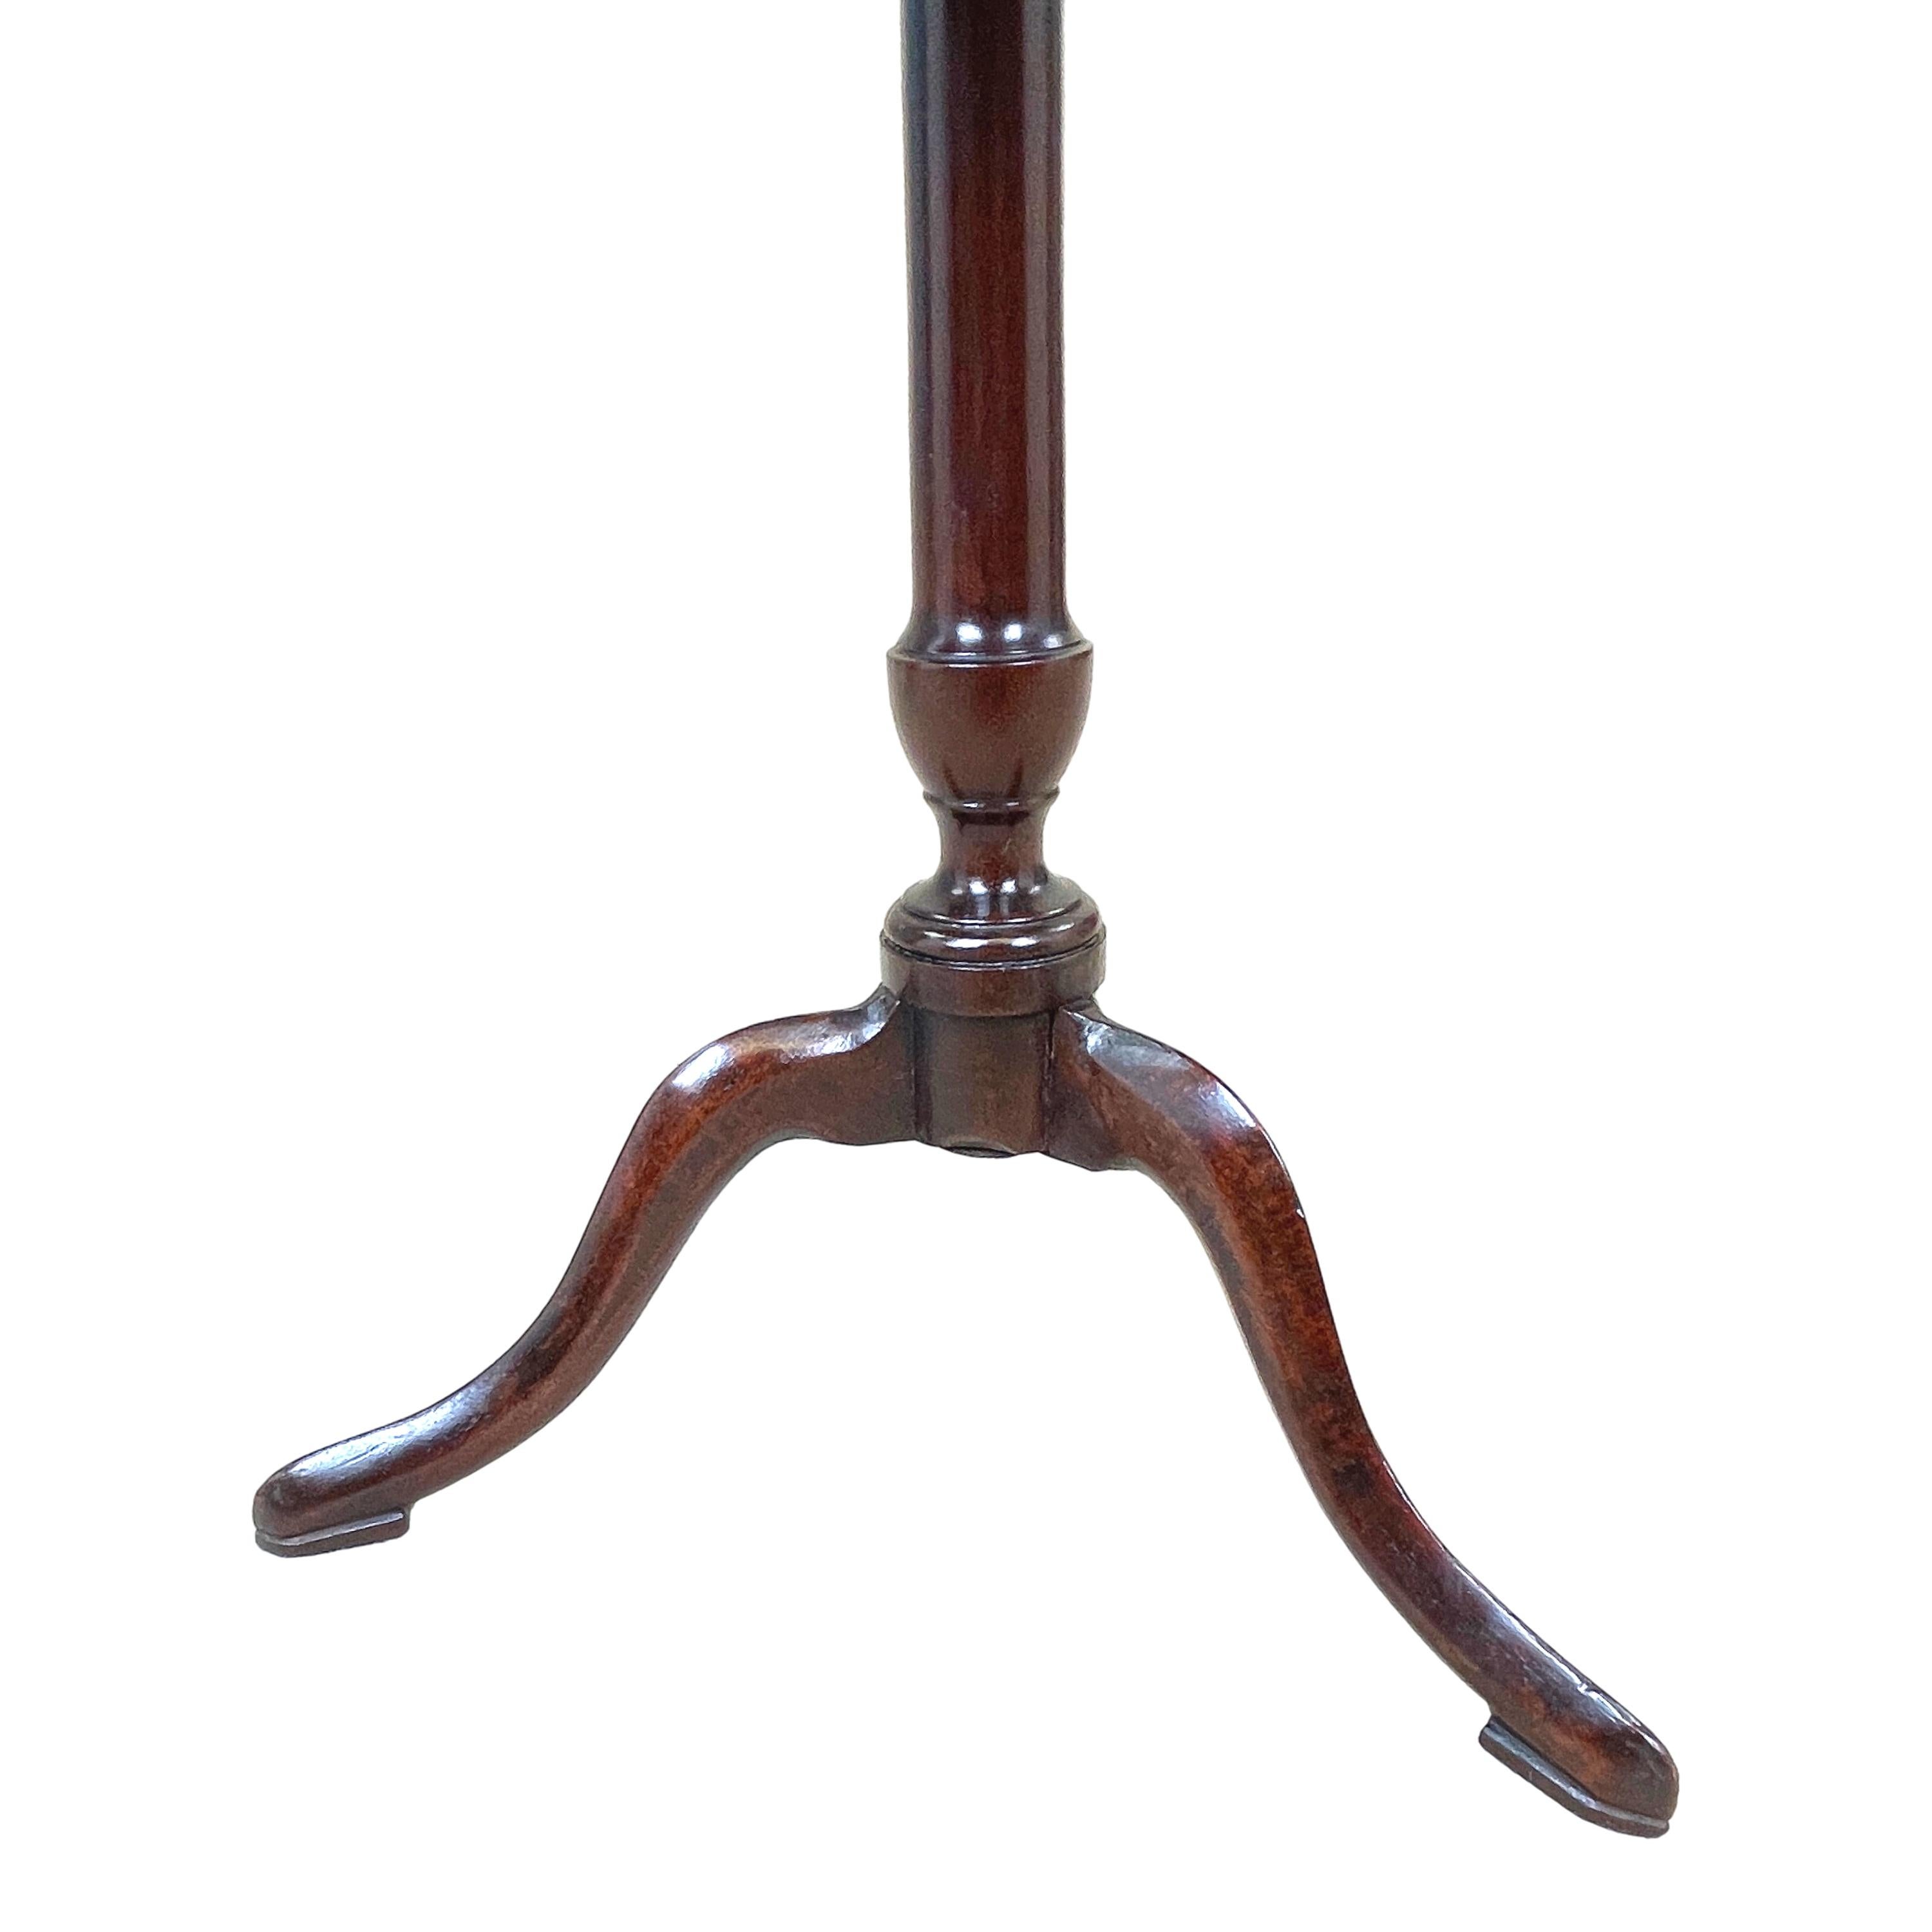 A superb quality 18th century mahogany George II
Period miniature table having well figured circular
Tilting top over vase turned central stem with
Elegant bold tripod legs terminating on
Pointed pad feet



(Almost certainly made as a